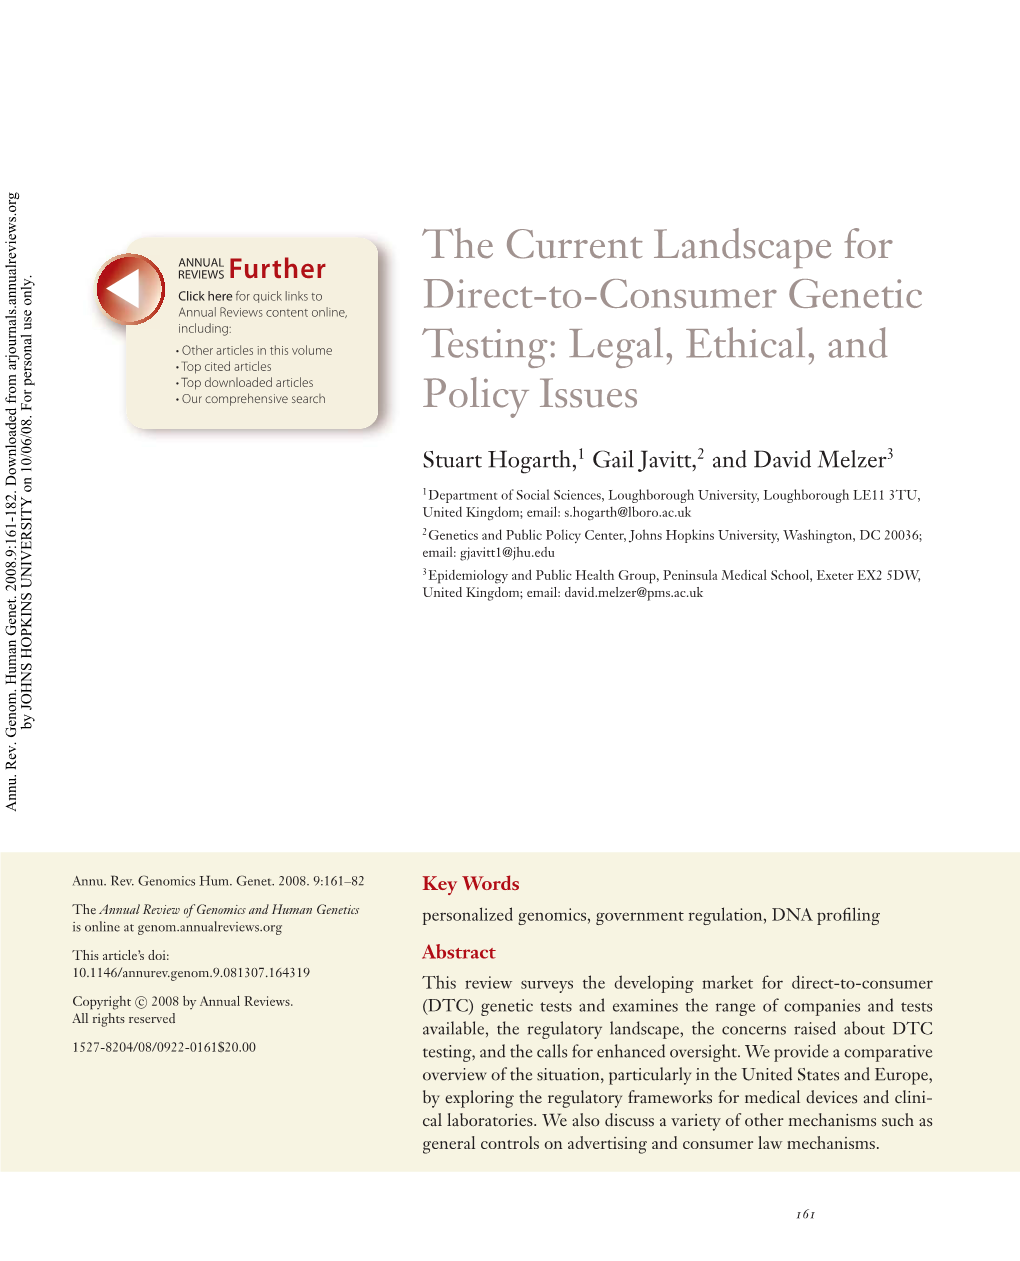 The Current Landscape for Direct-To-Consumer